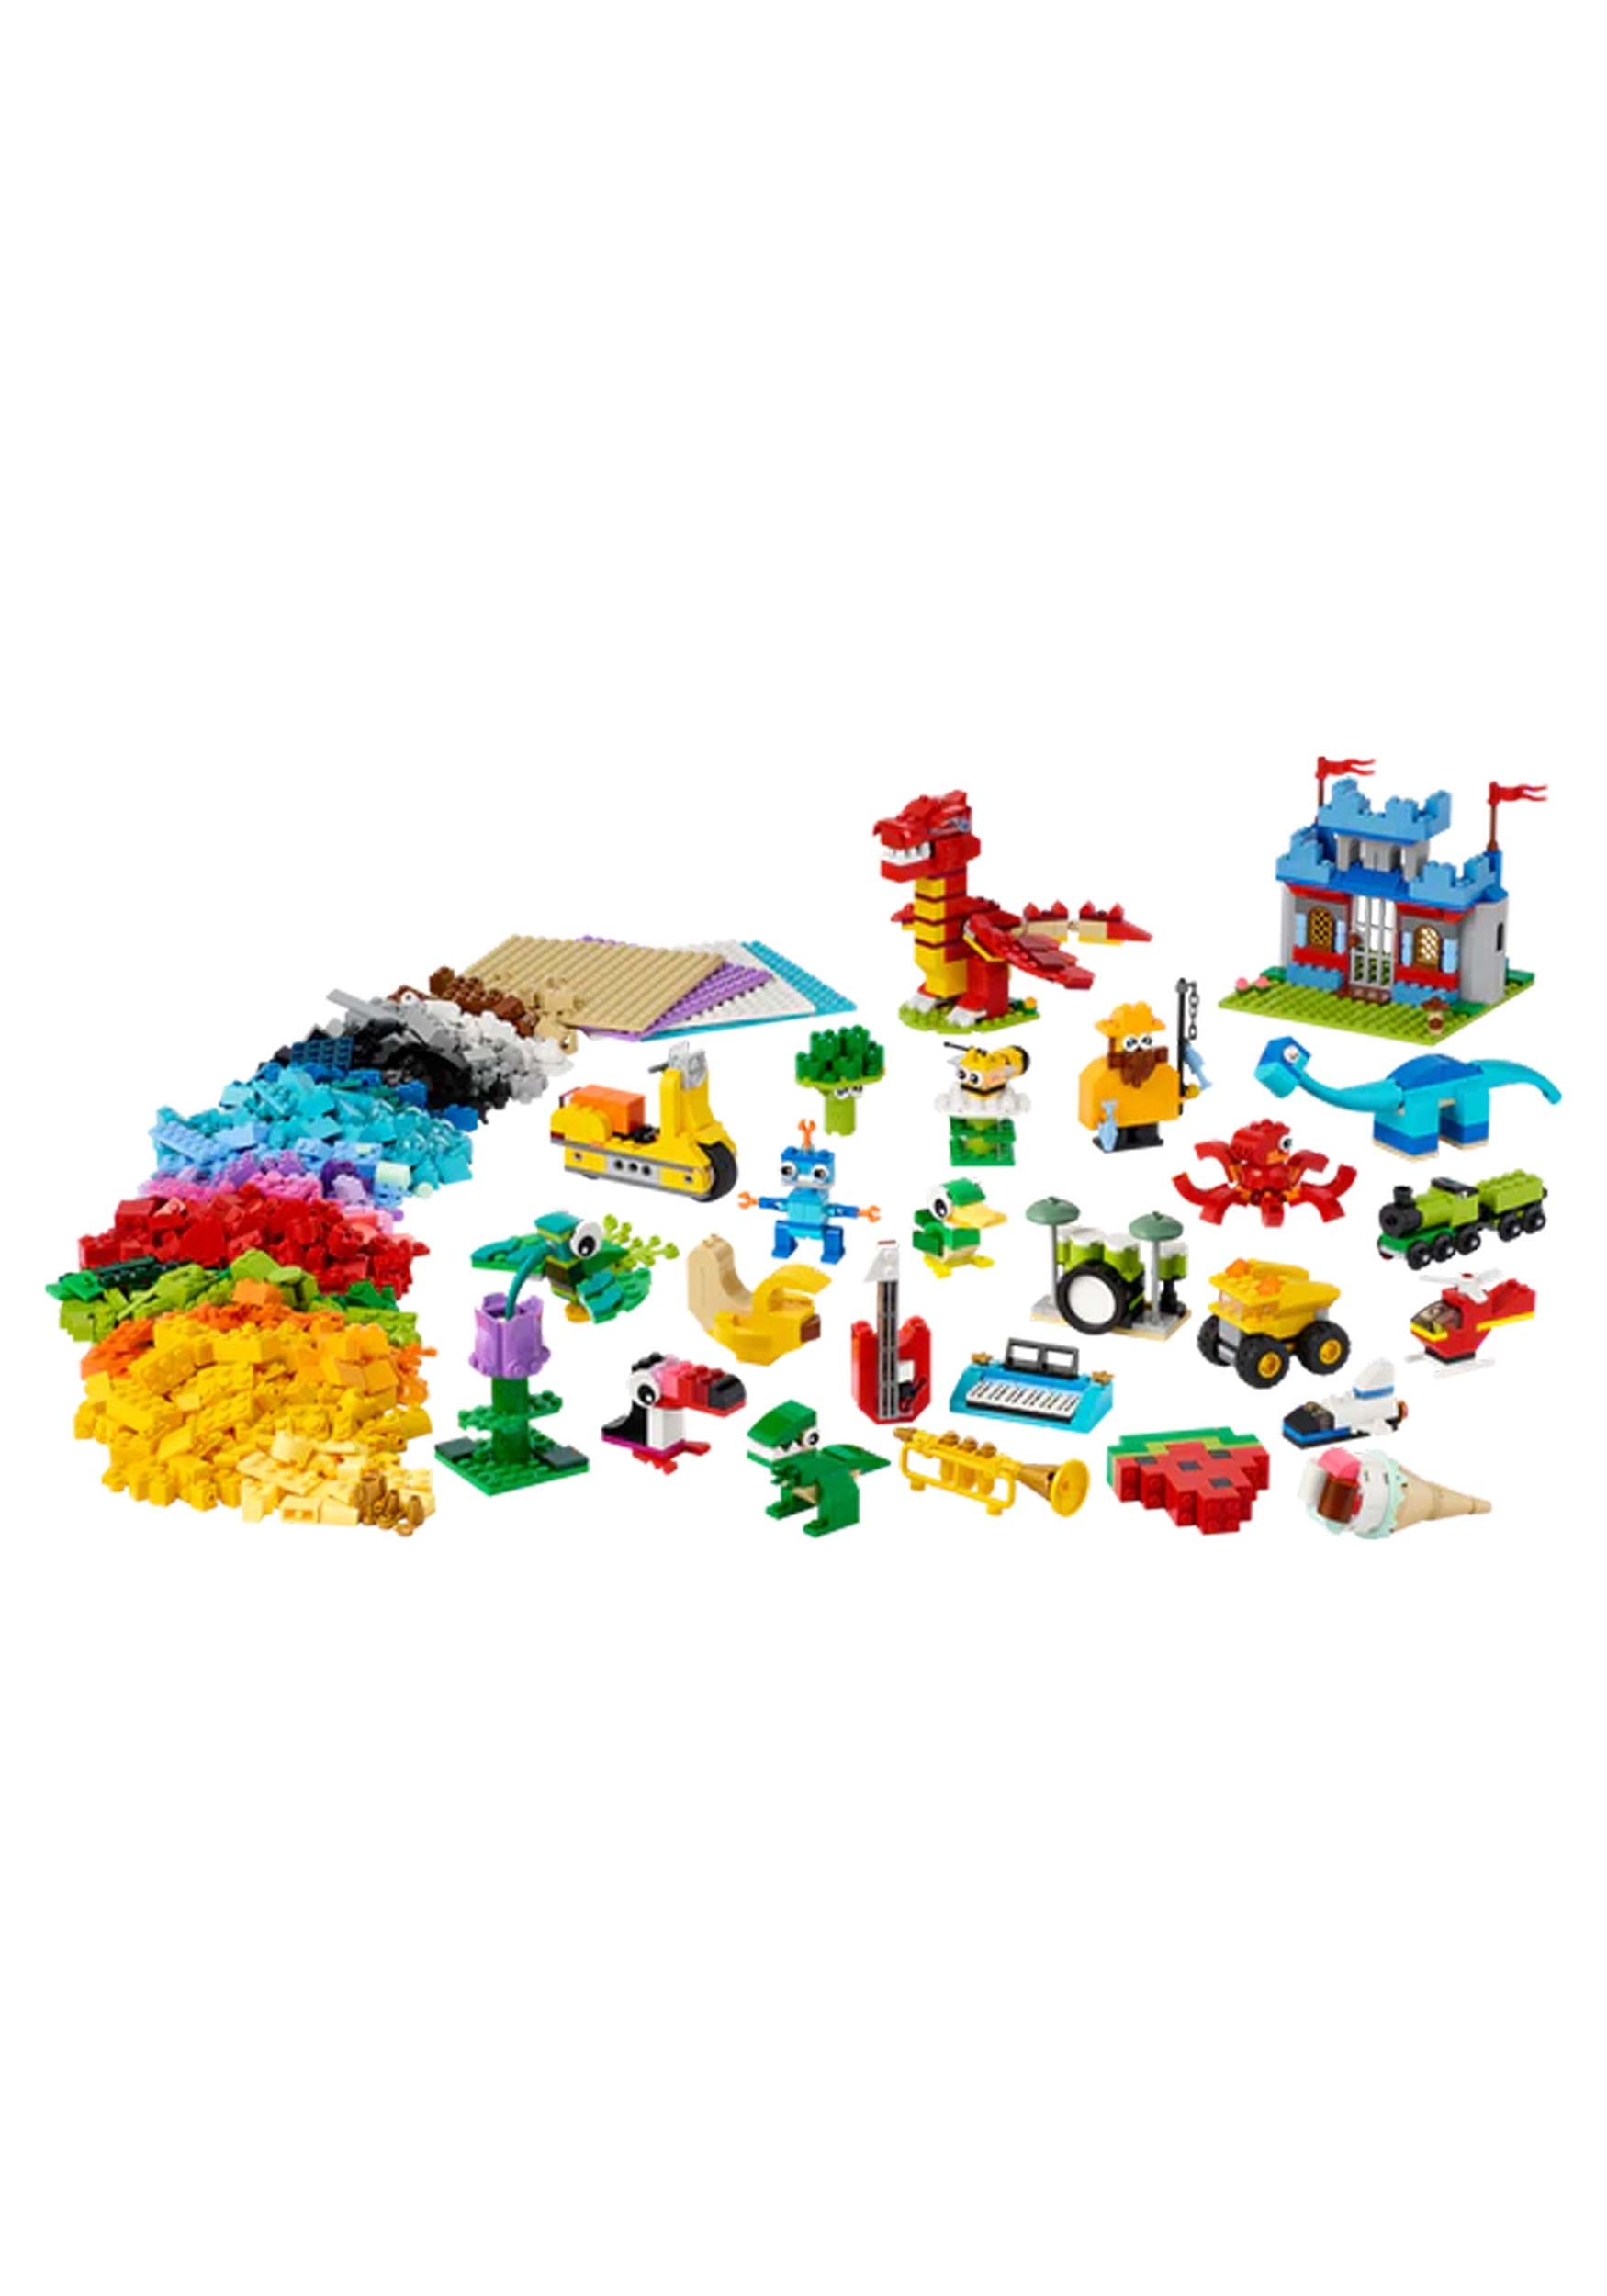 LEGO Classic Build Together Building Kit for Kids